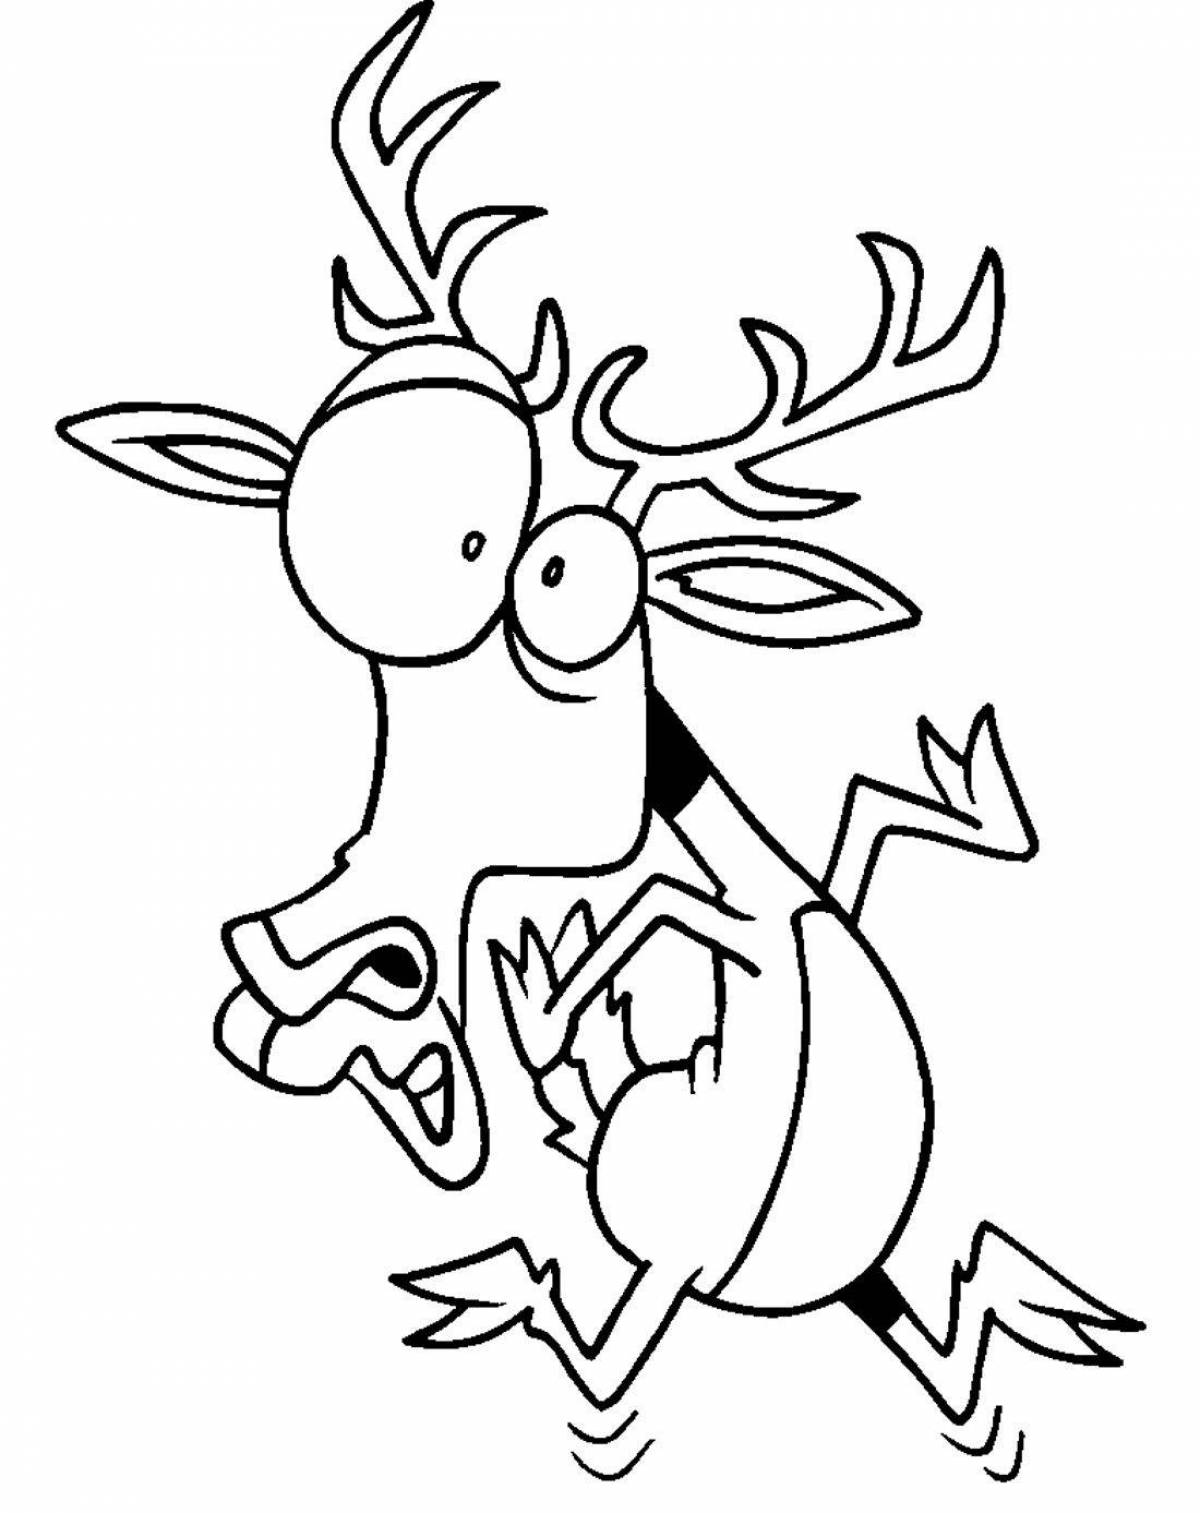 Exotic Christmas deer coloring page